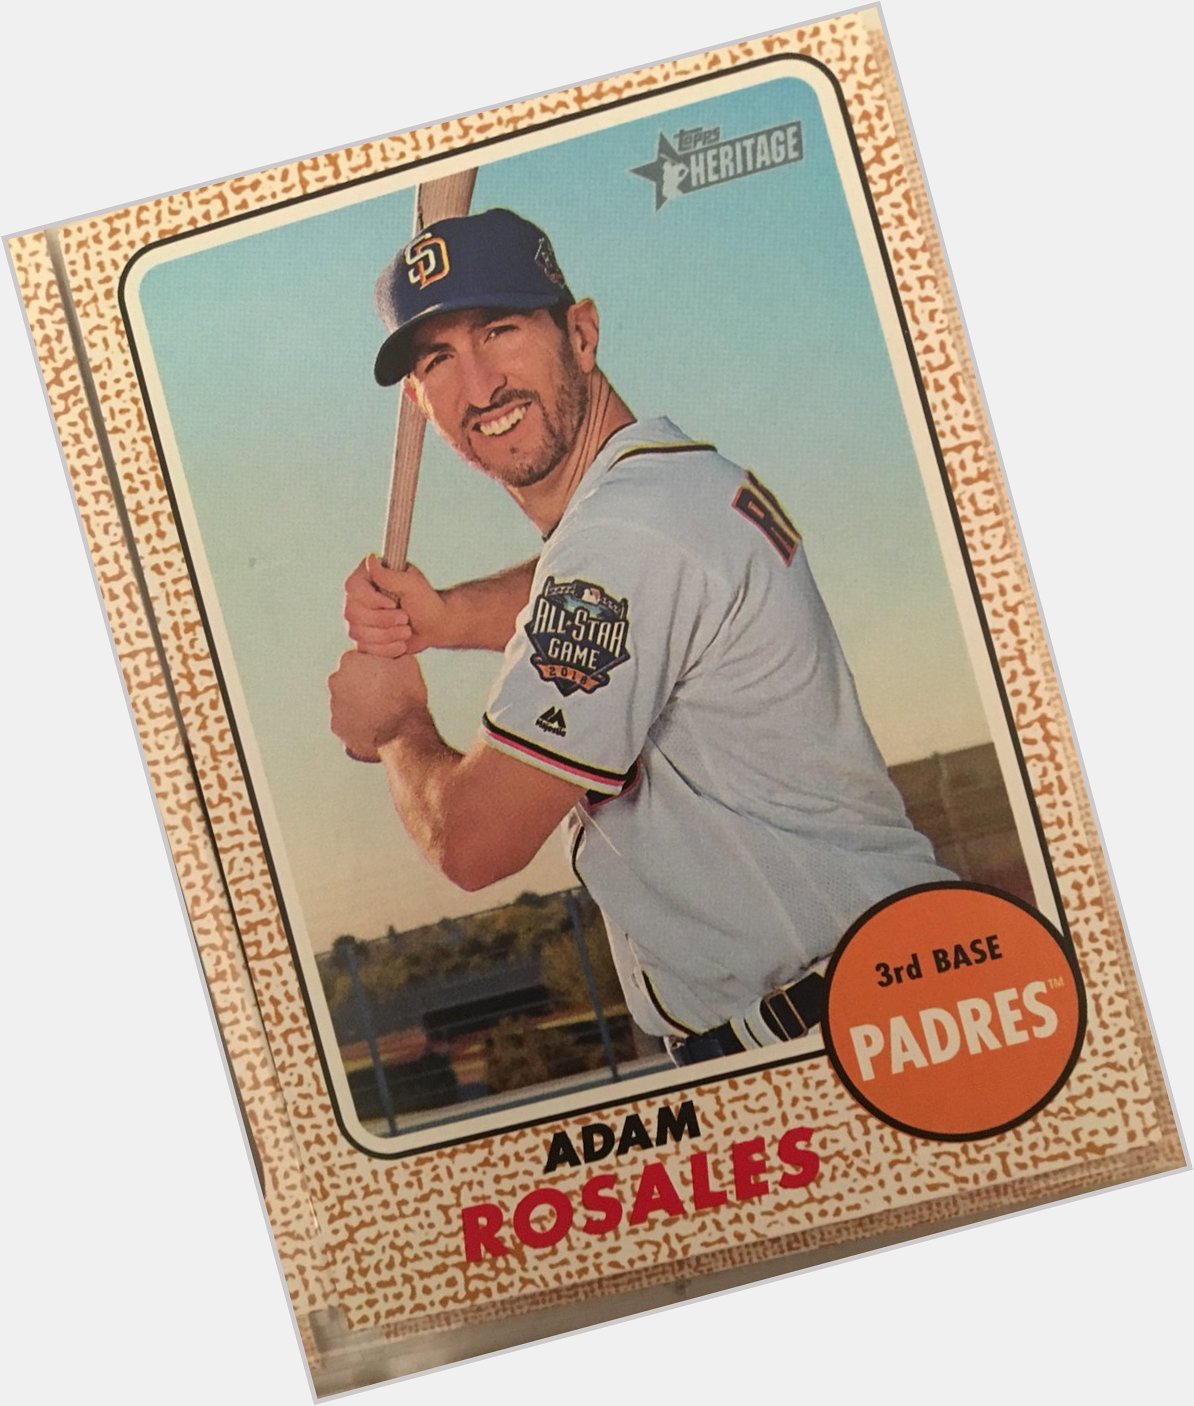 Happy birthday to former Friar and home run sprint enthusiast Adam Rosales. 